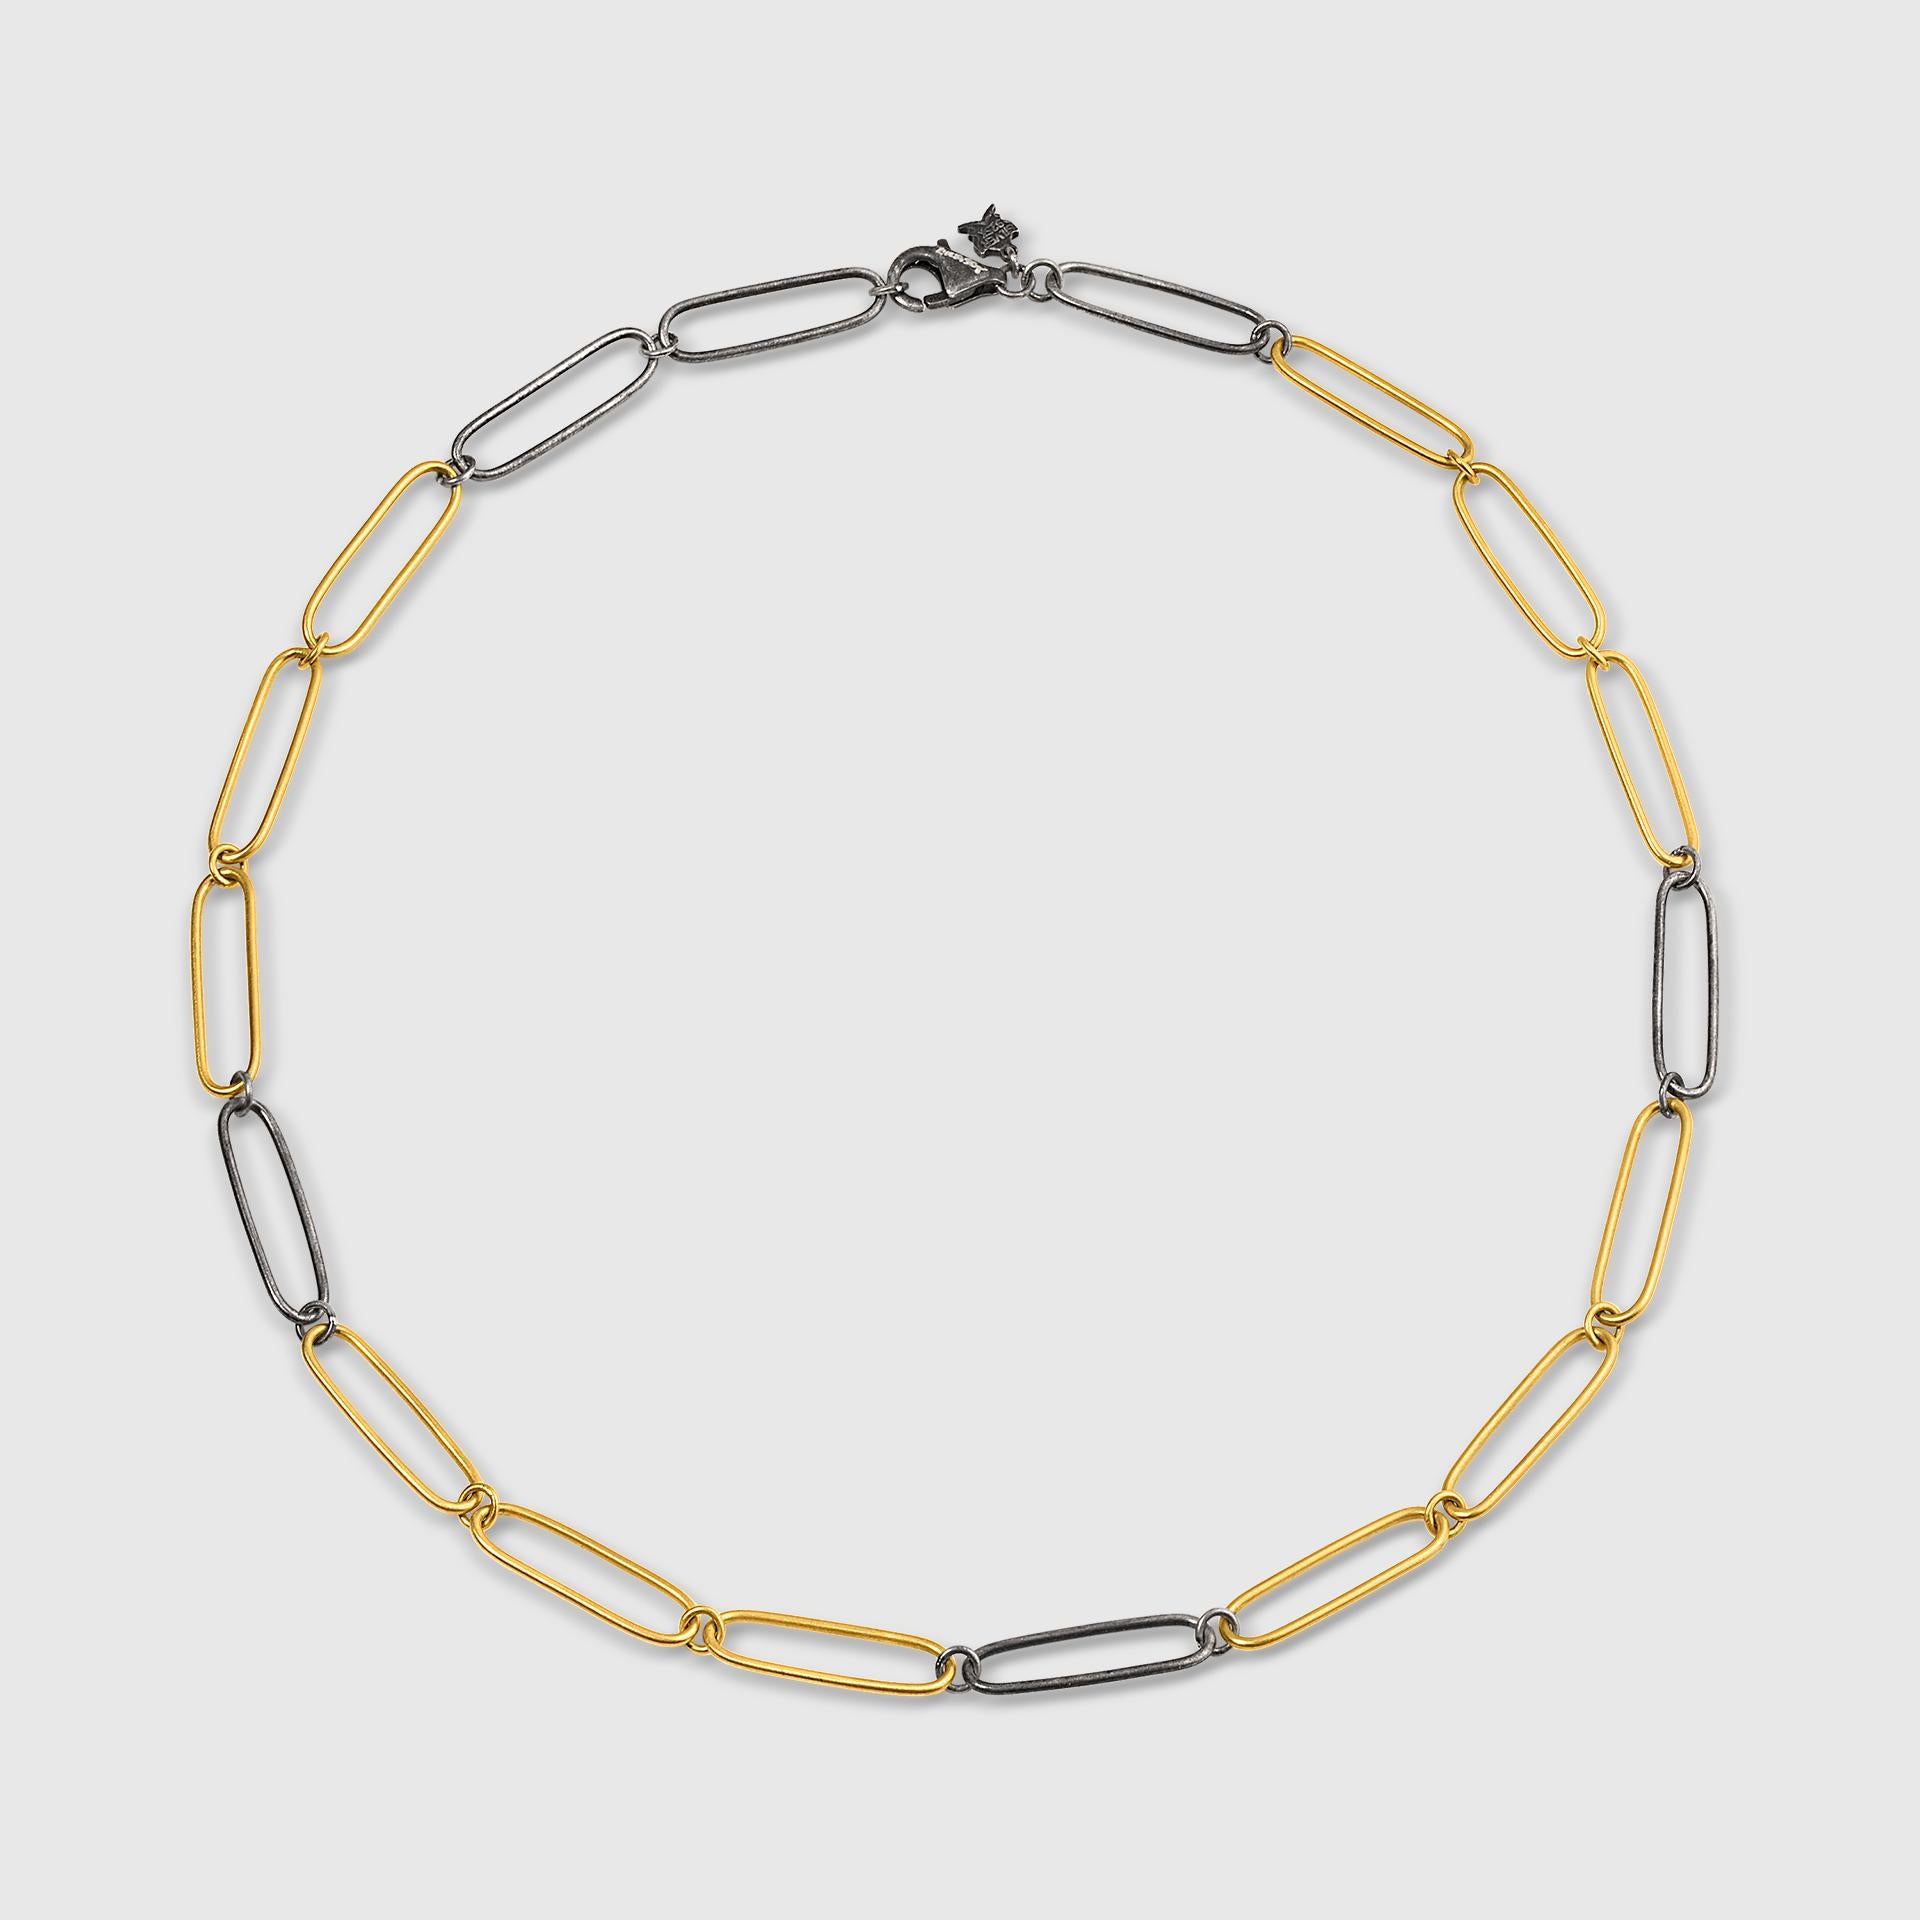 Two-Toned 24K Gold and Silver Chain 16